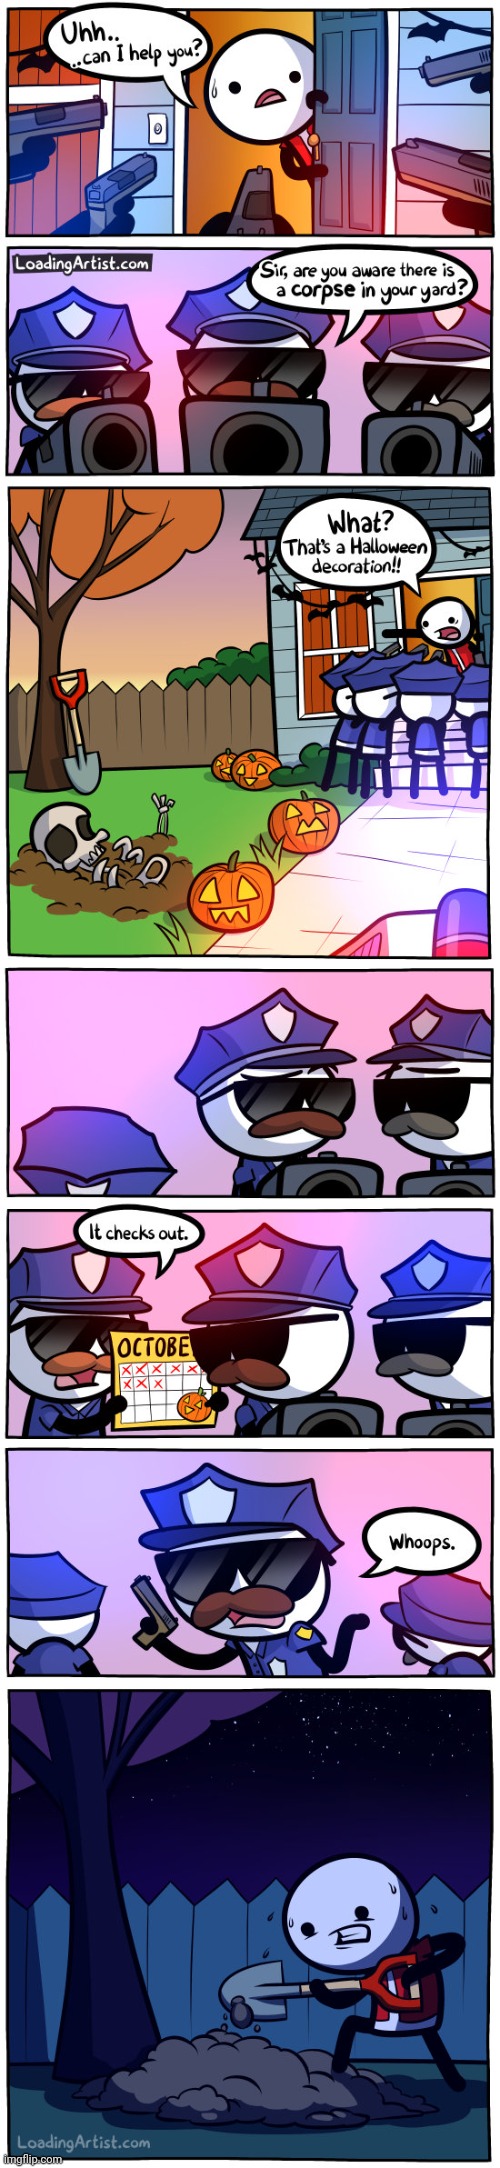 Corpse | image tagged in happy halloween,halloween,comics,comics/cartoons,corpse,theodd1sout | made w/ Imgflip meme maker